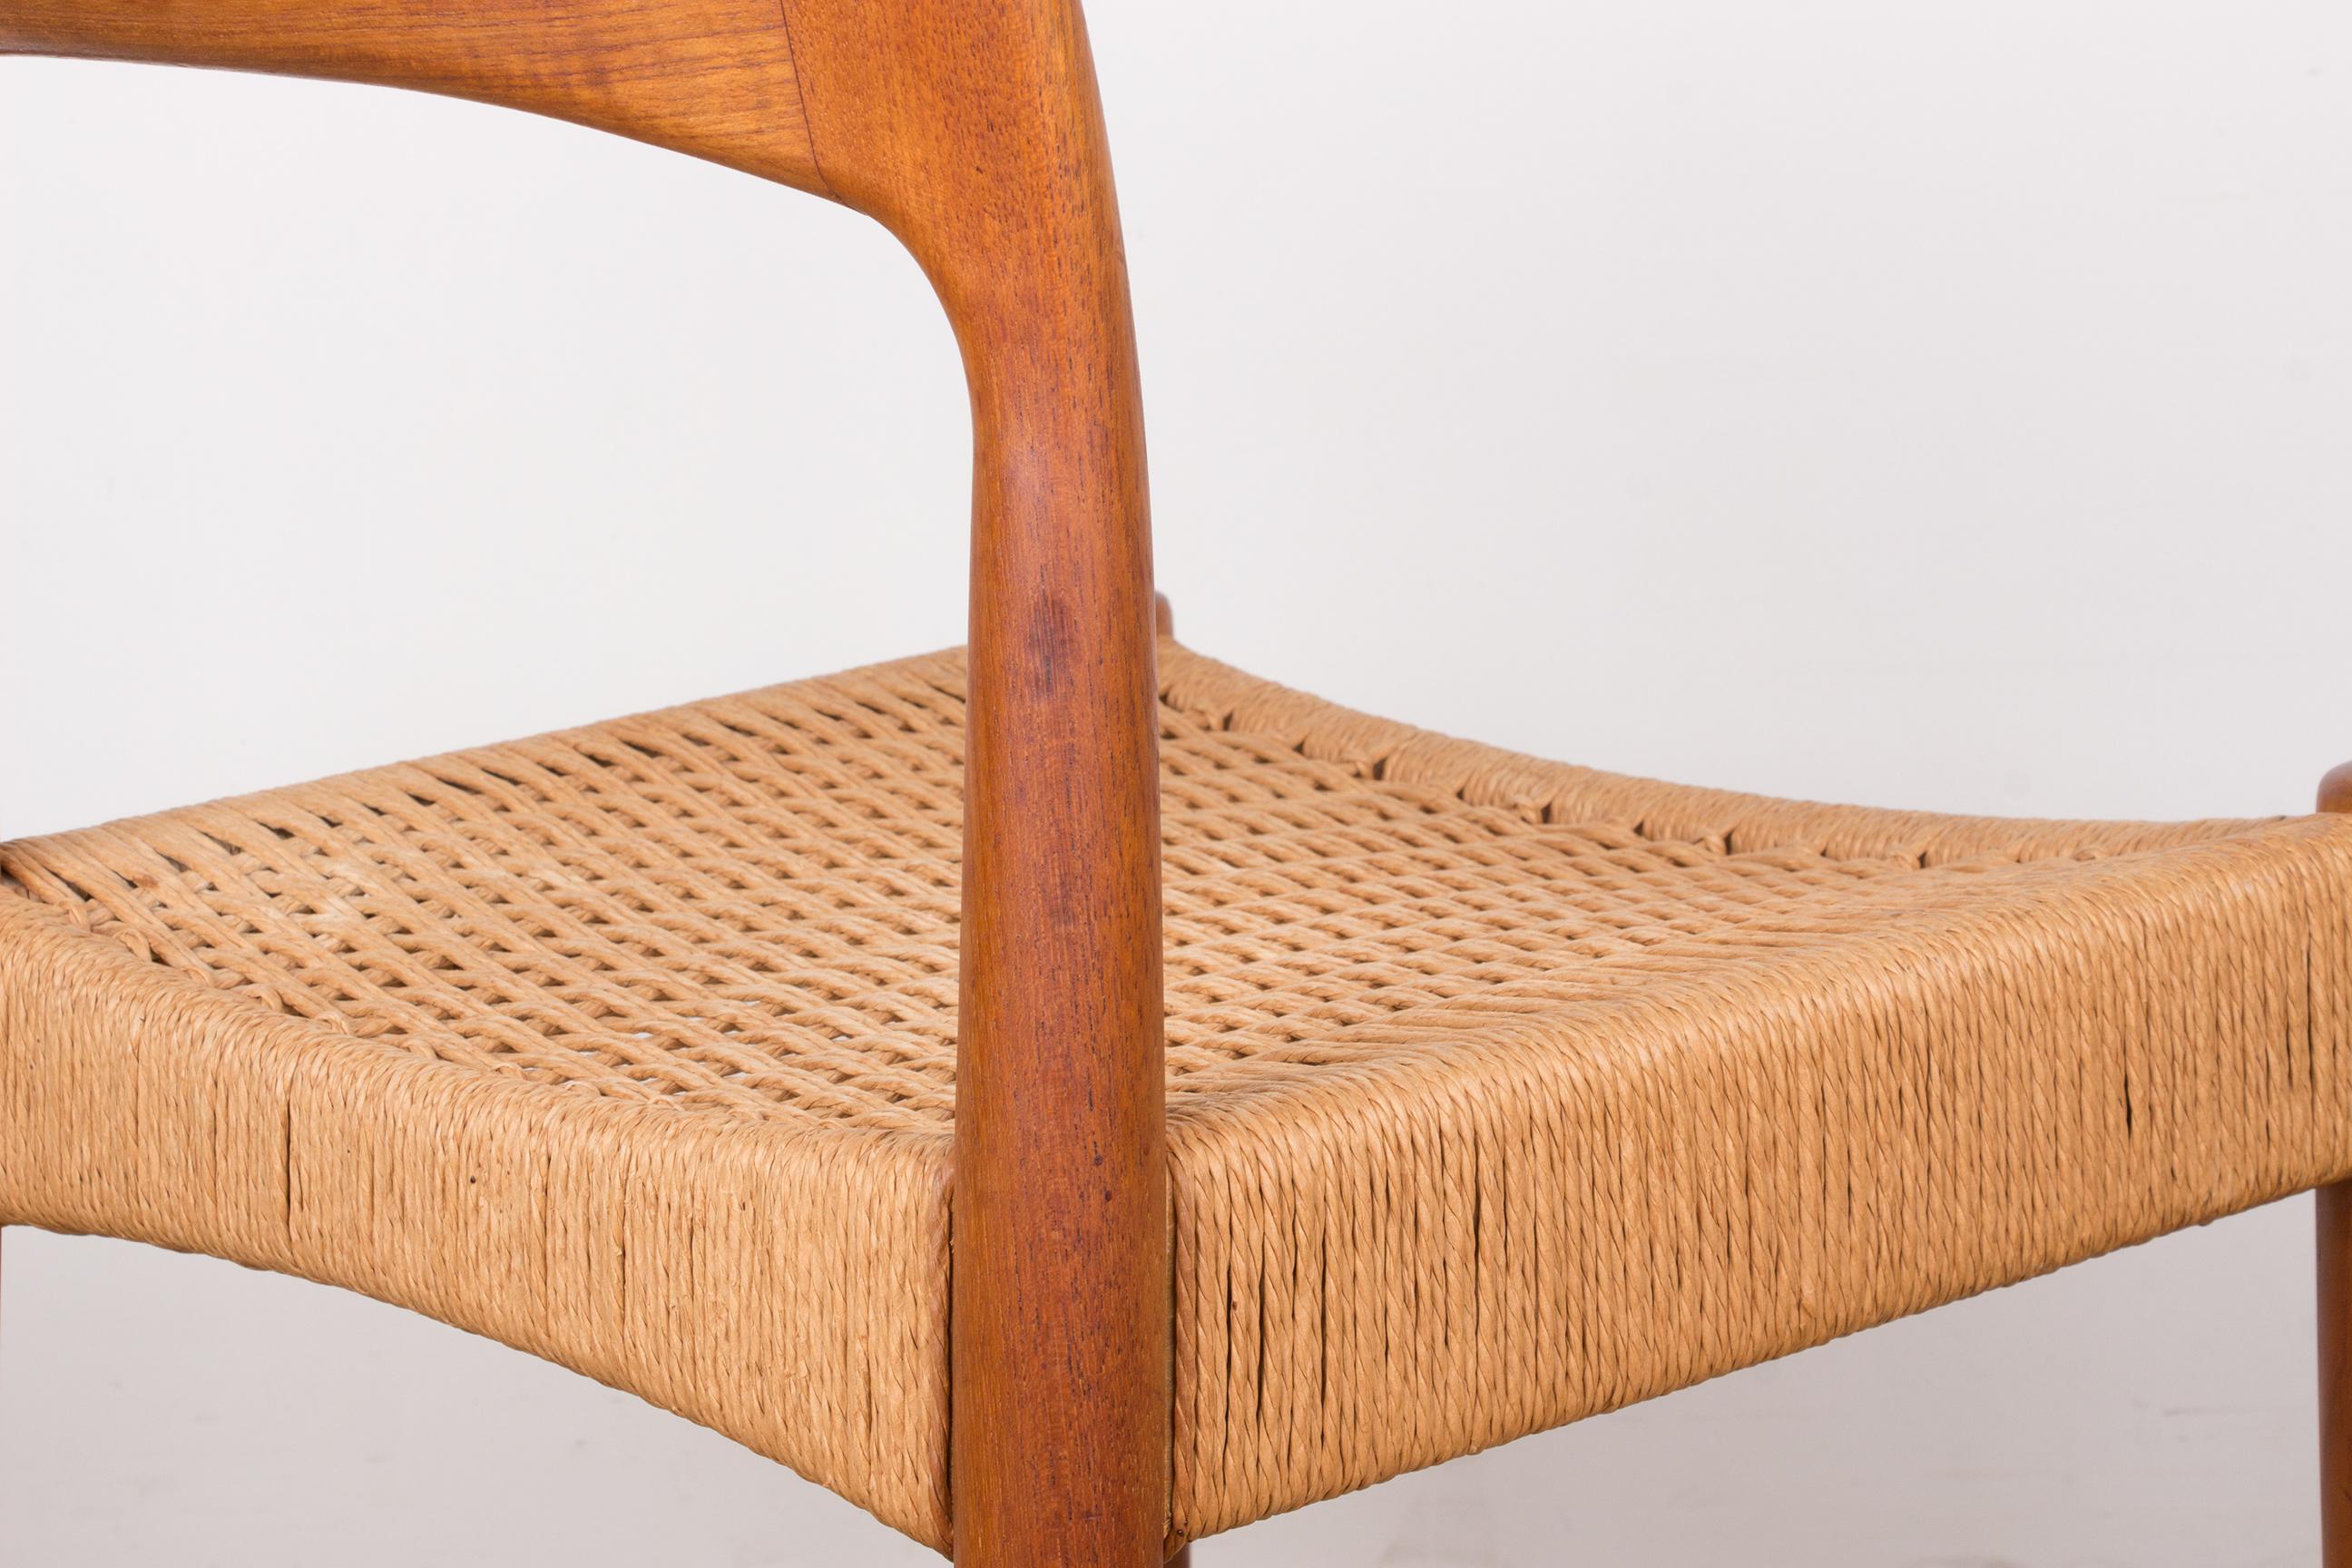 Rope Series of 4 Danish Teak and Cordage chairs by Arne Hovmand Olsen 1960. For Sale